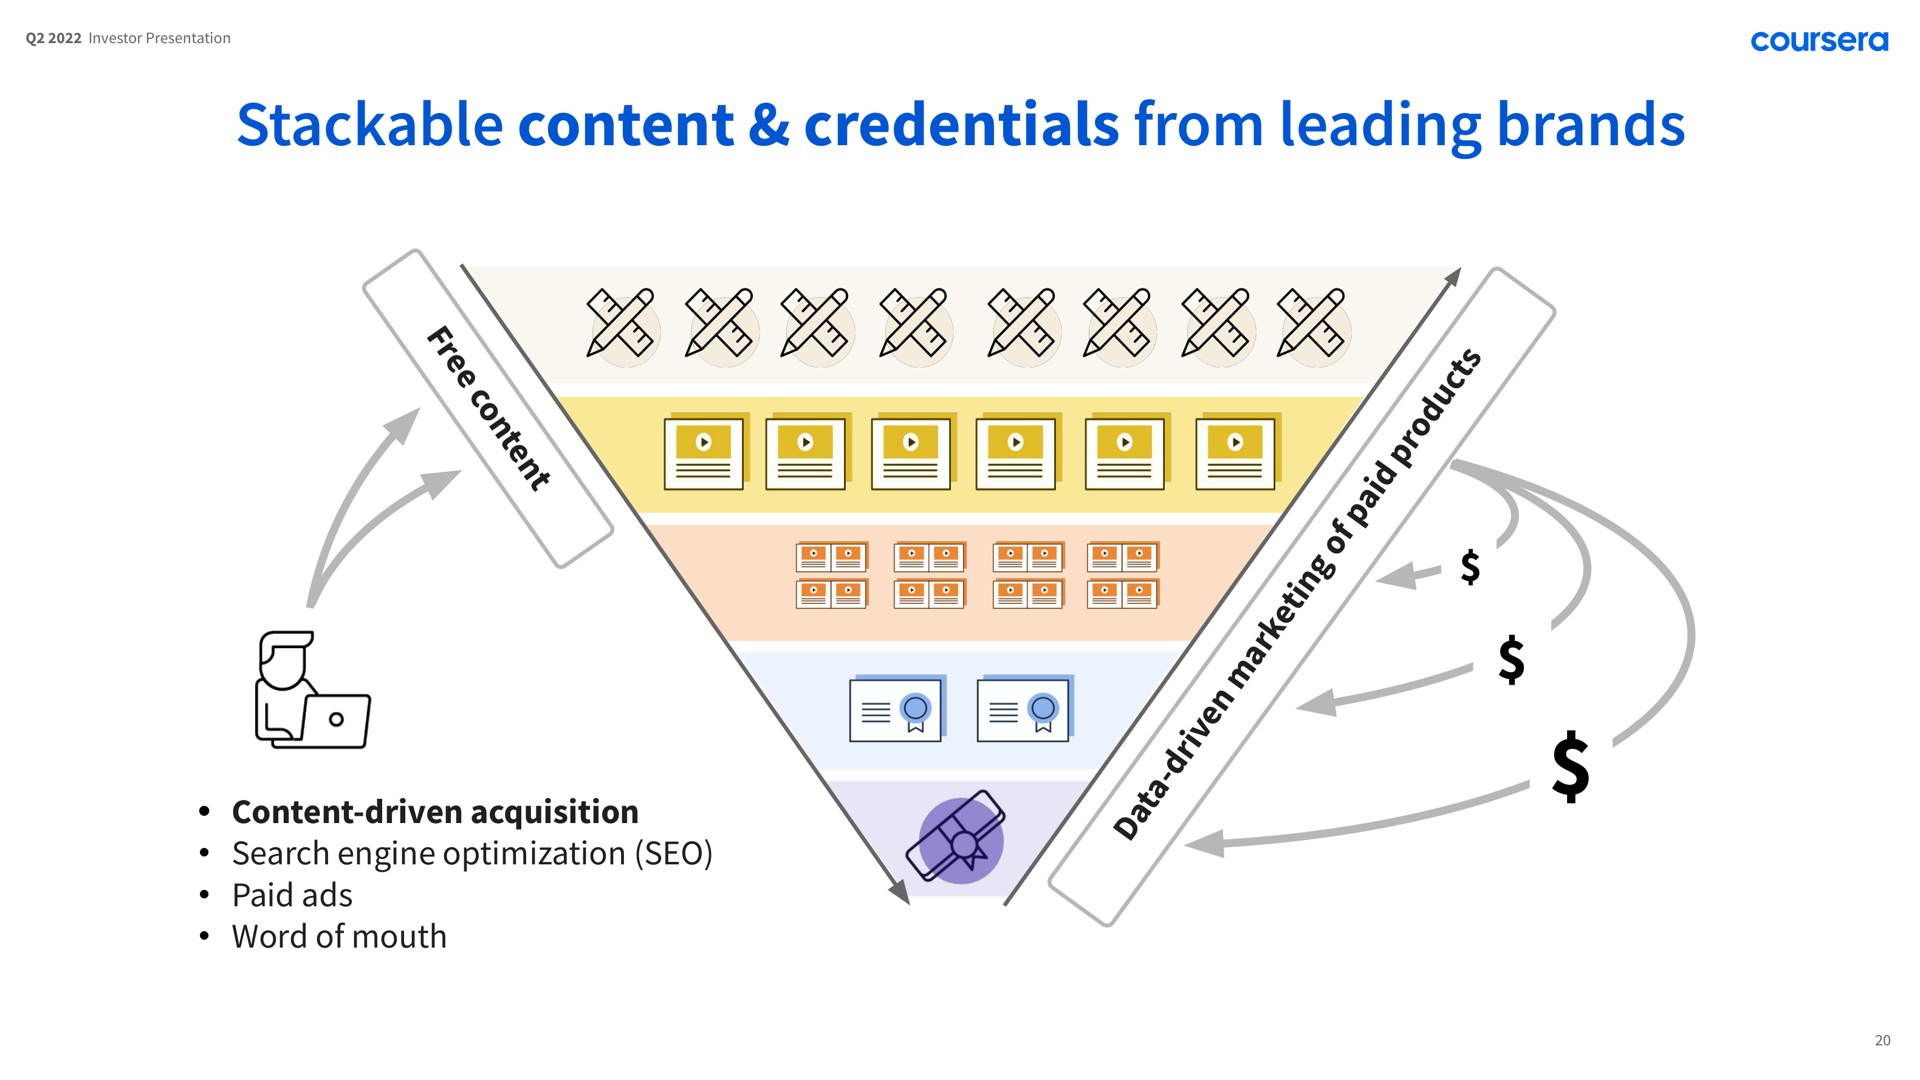 content credentials from leading brands search engine optimization word of mouth paid ads | Coursera